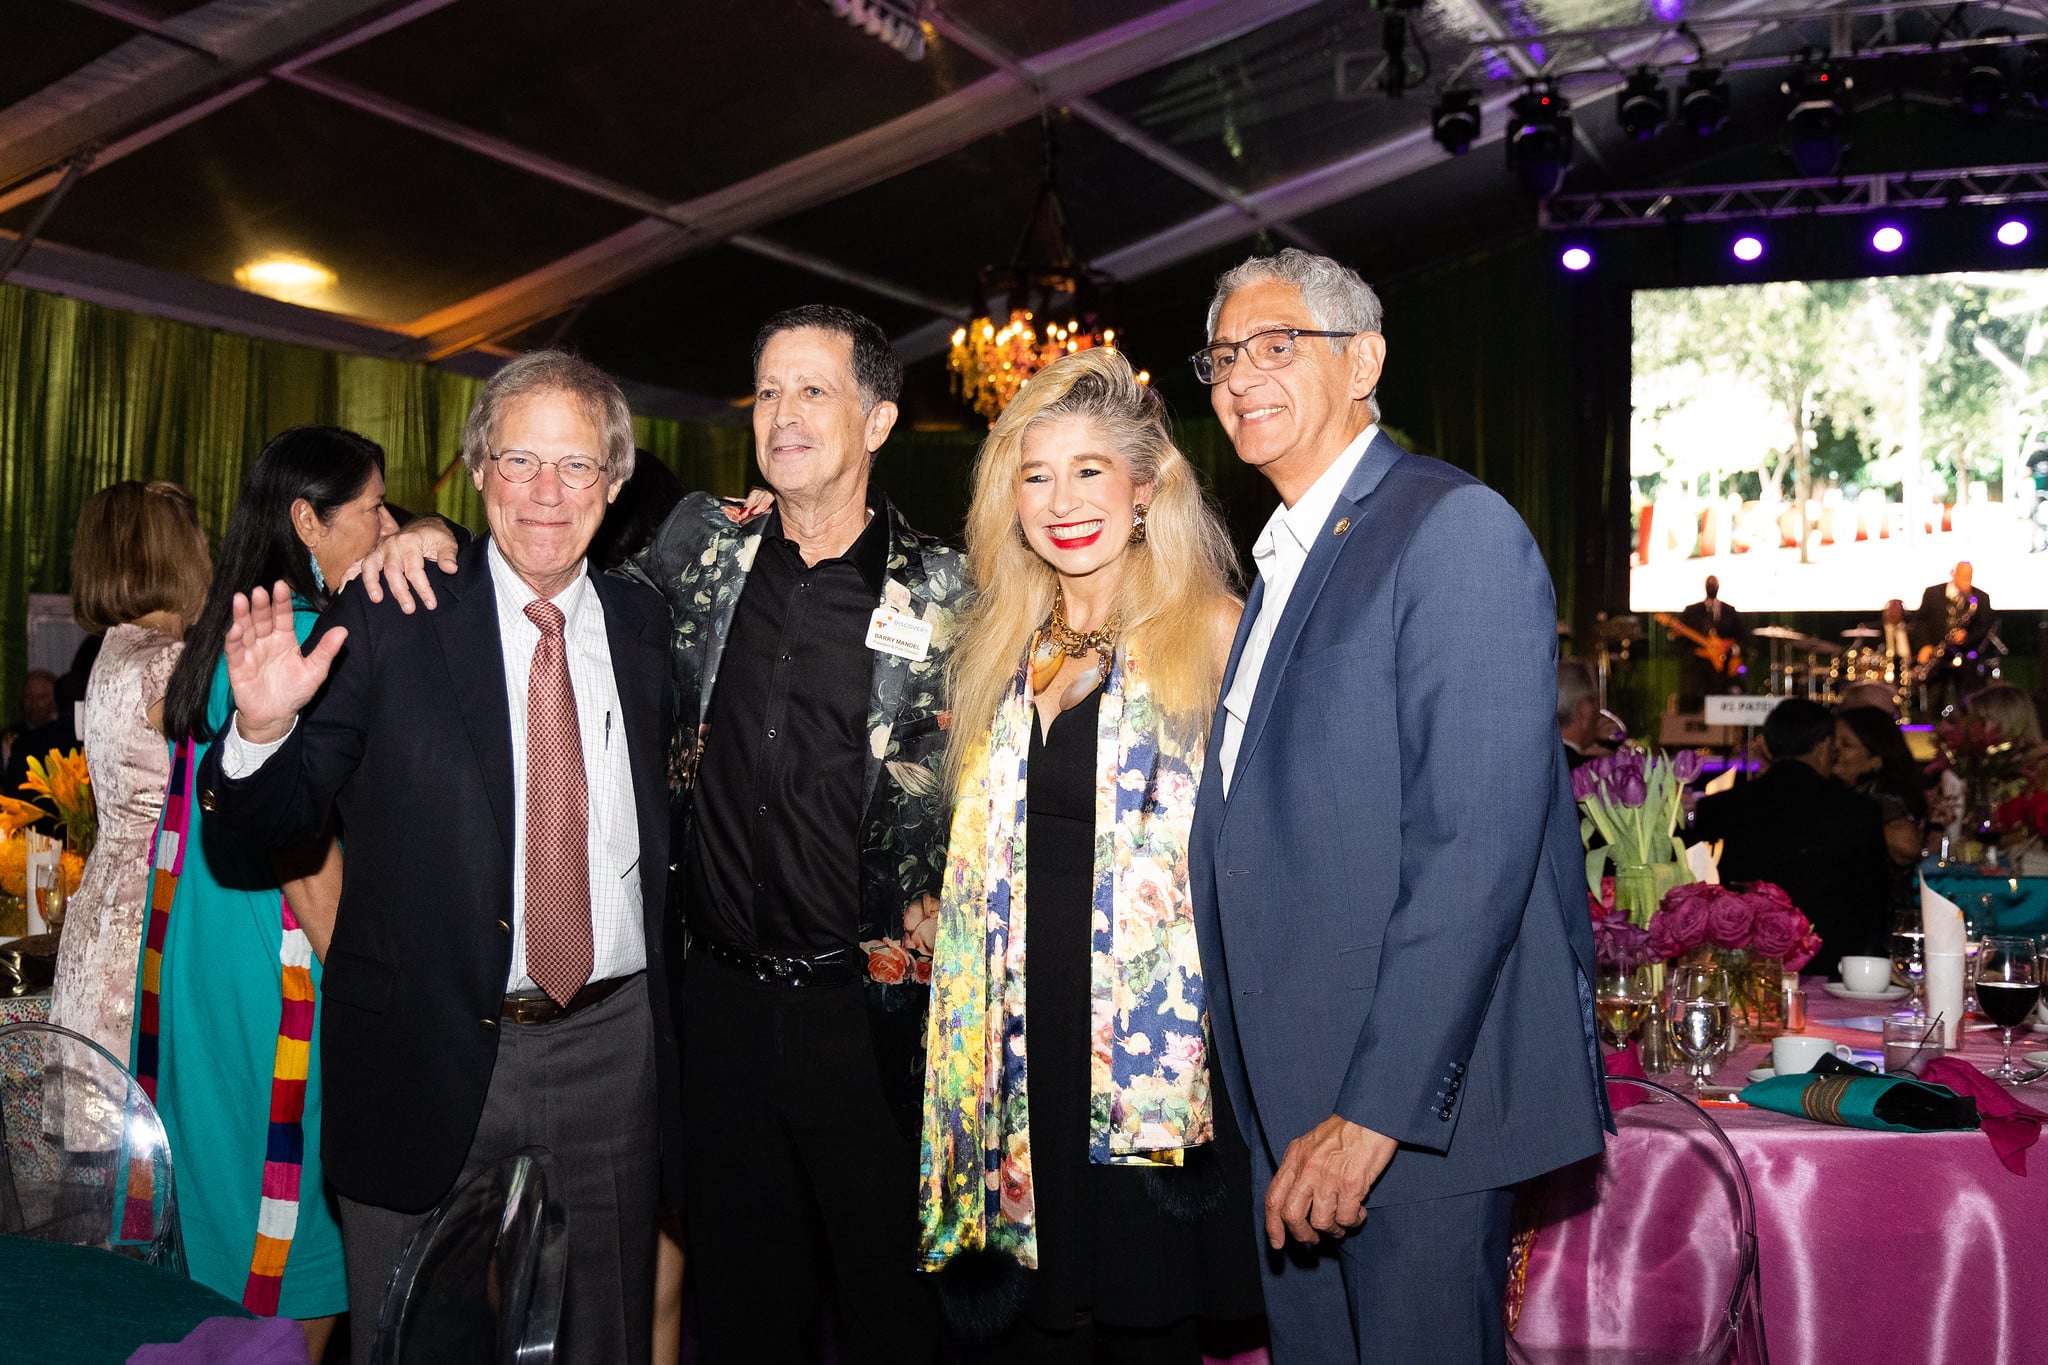 From L-R: Dr. Stephen Klineberg, Barry Mandel, Sofia Adrogue, Robert Gallegos Gala on the Green® at Discovery Green in downtown Houston. February 23, 2023. Photo: Lawrence Elizabeth Knox